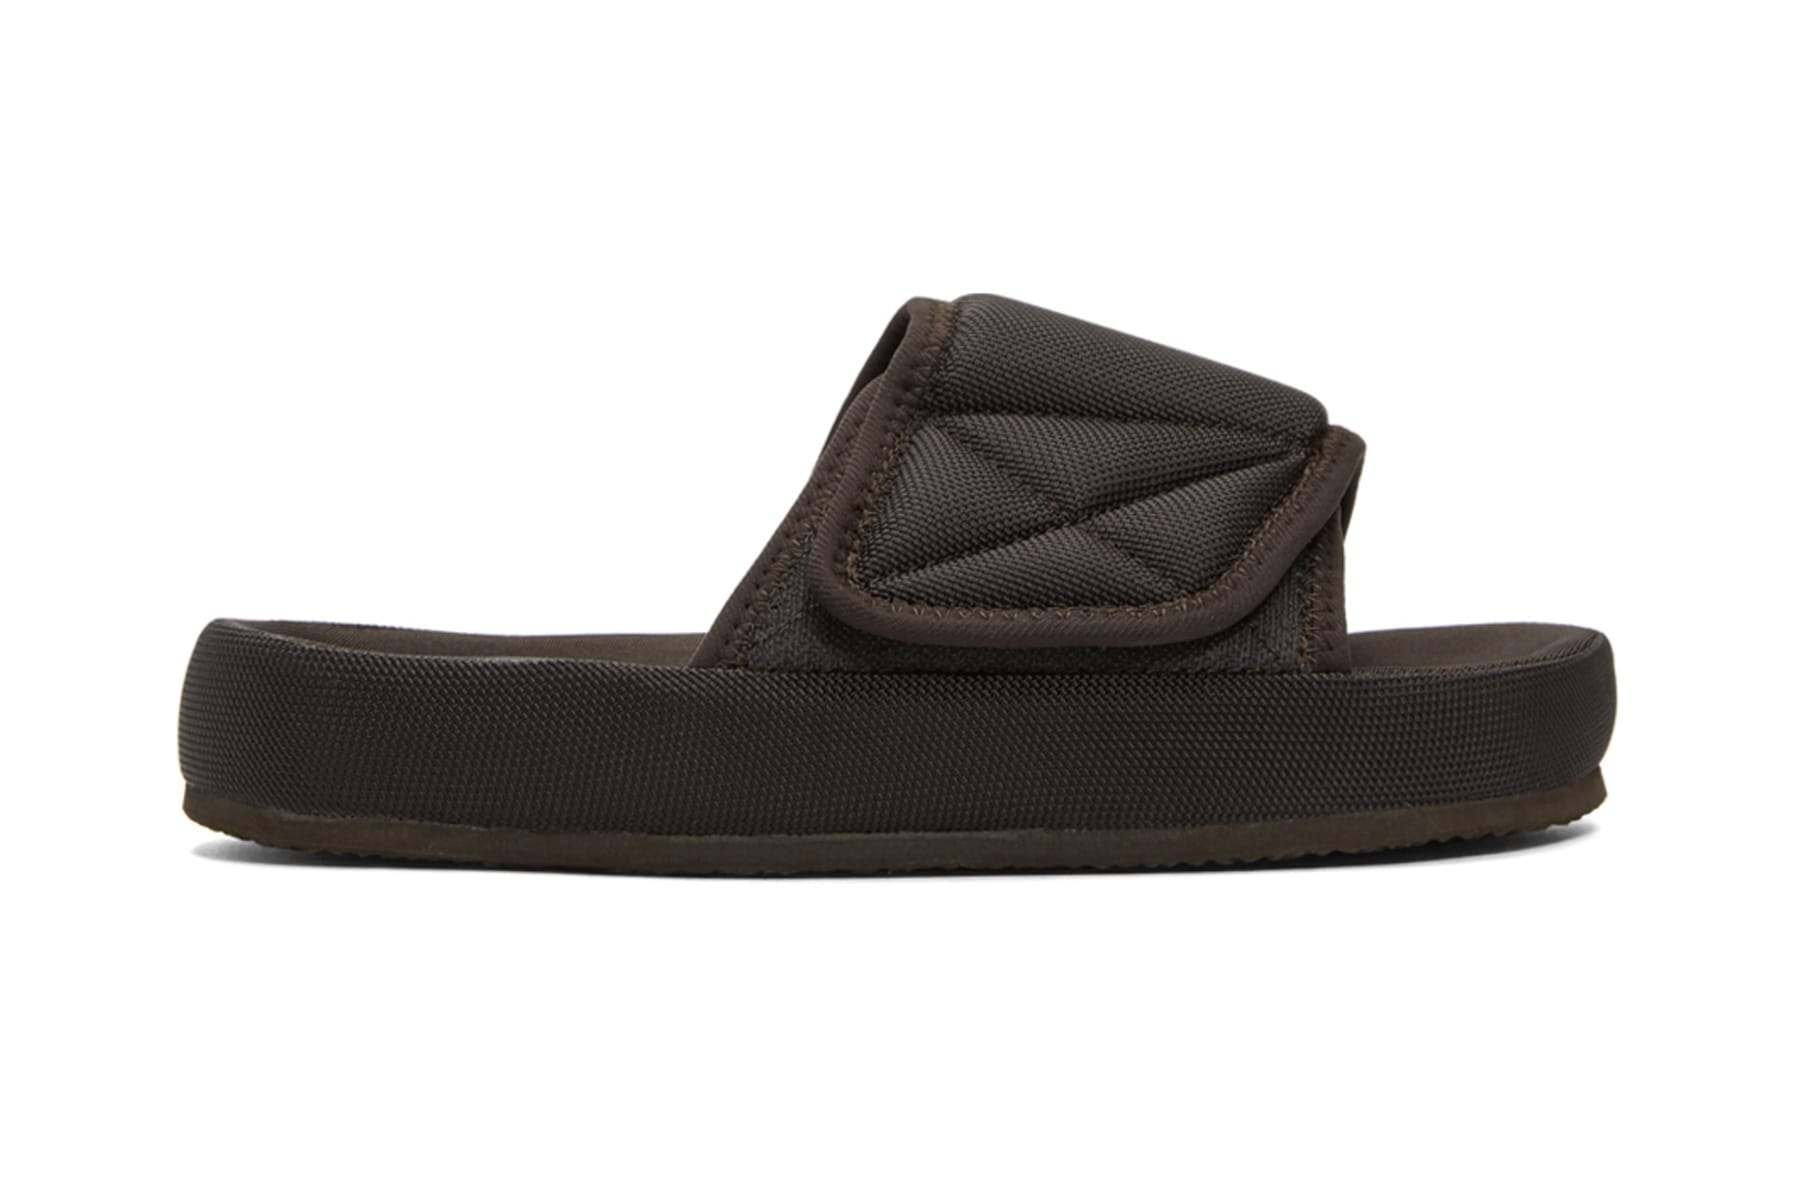 yeezy slides with strap